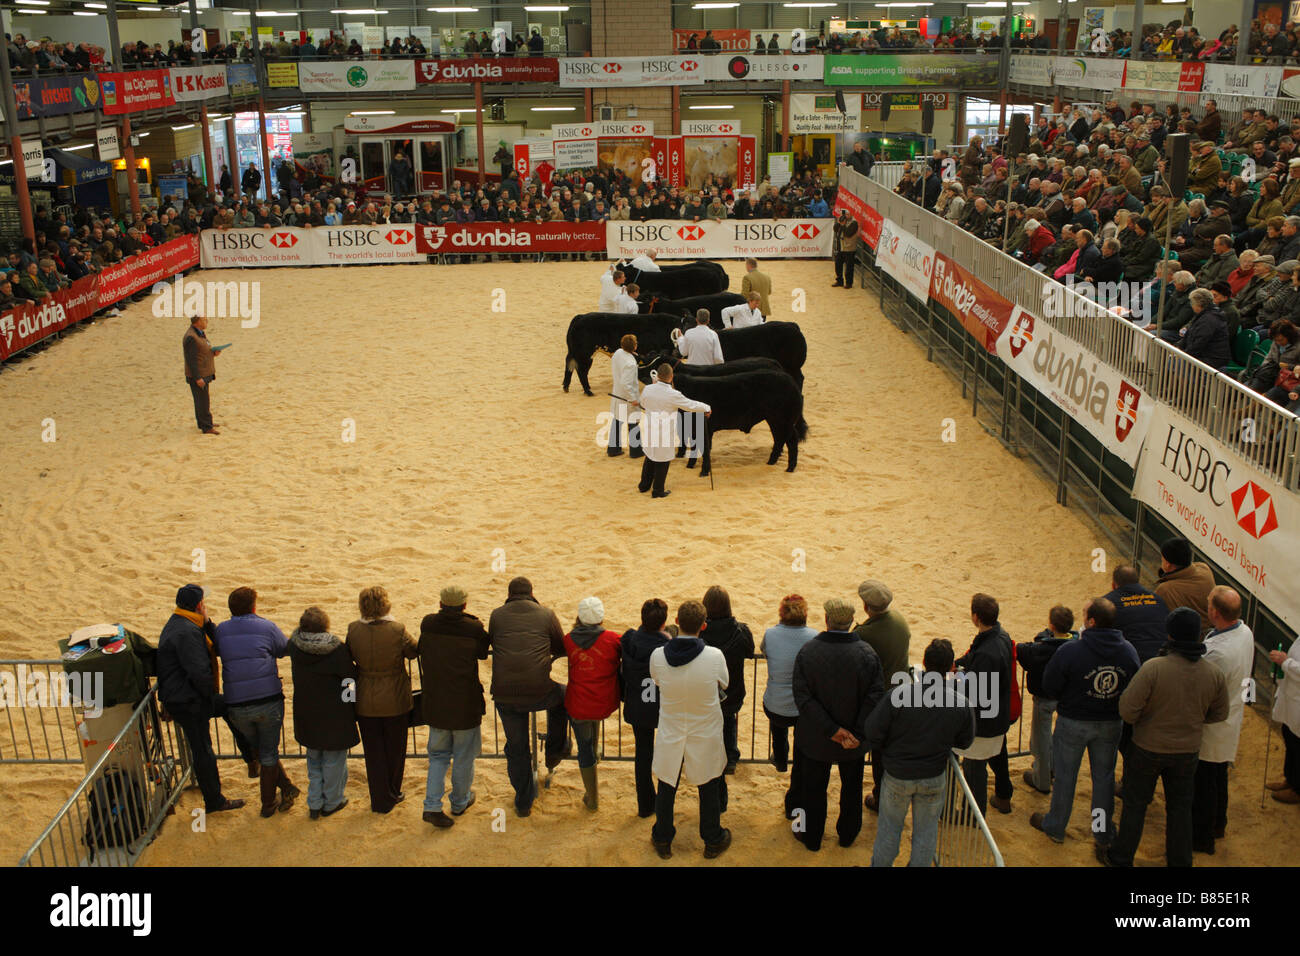 Judging in progress with one of the fat cattle classes at the Welsh Winter Agricultural Fair. Stock Photo